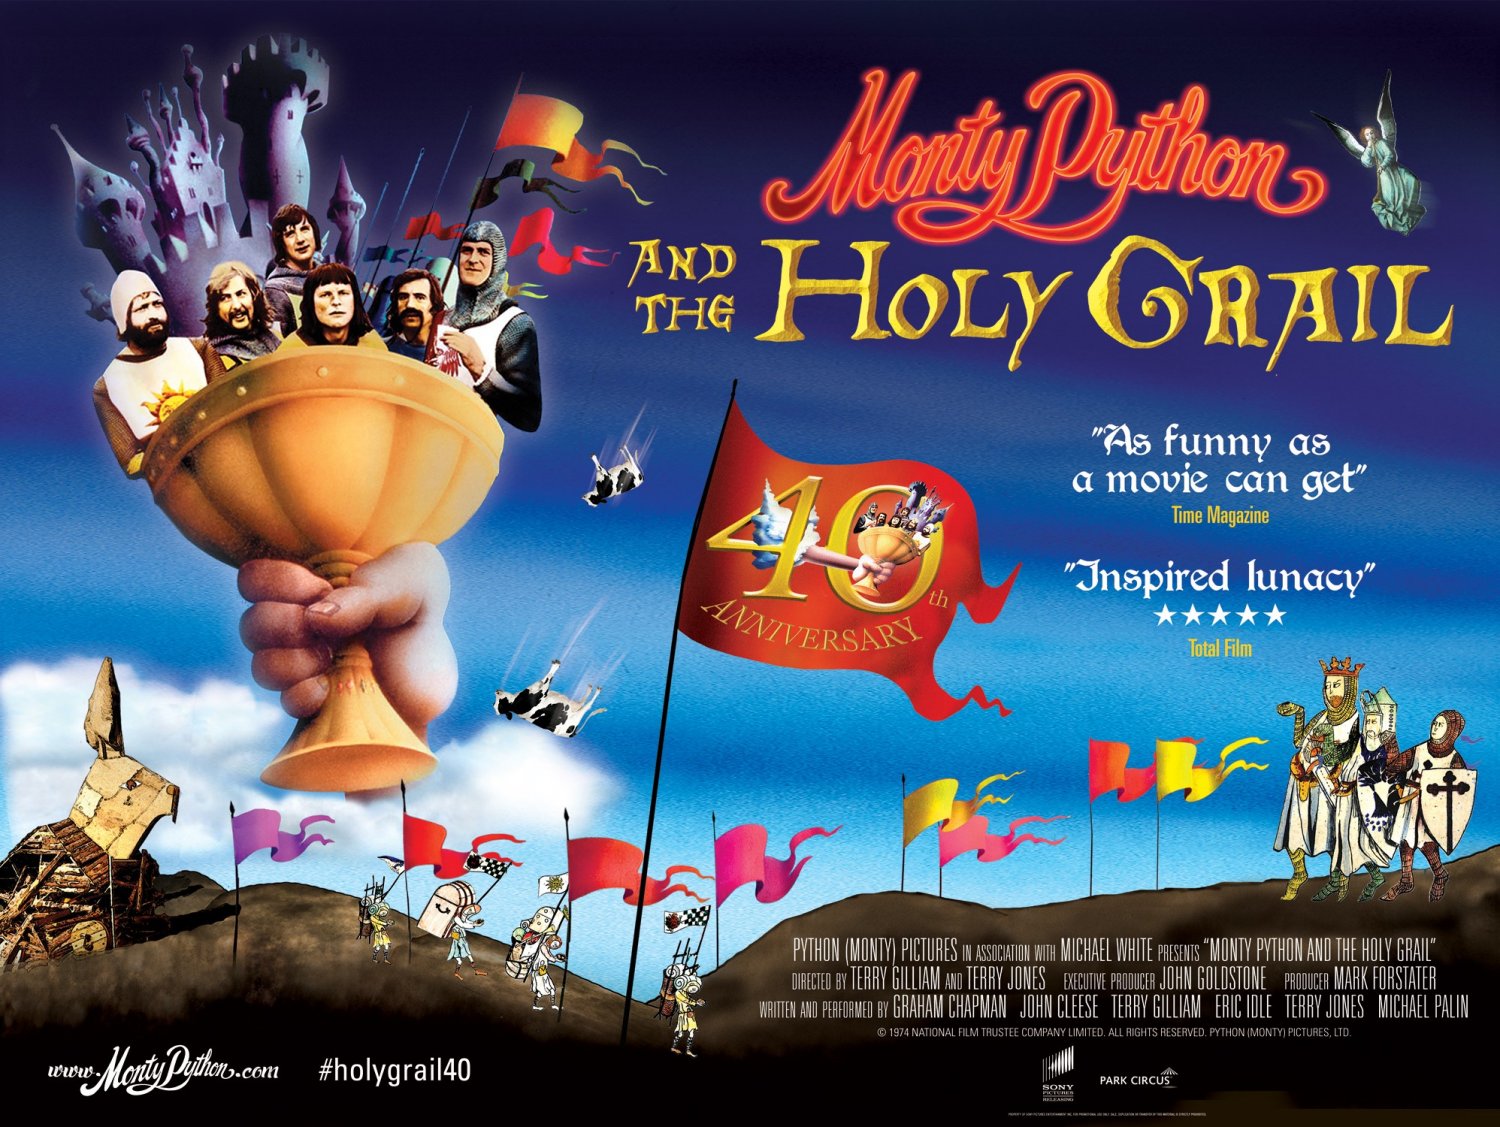 Monty Python and the holy grail poster